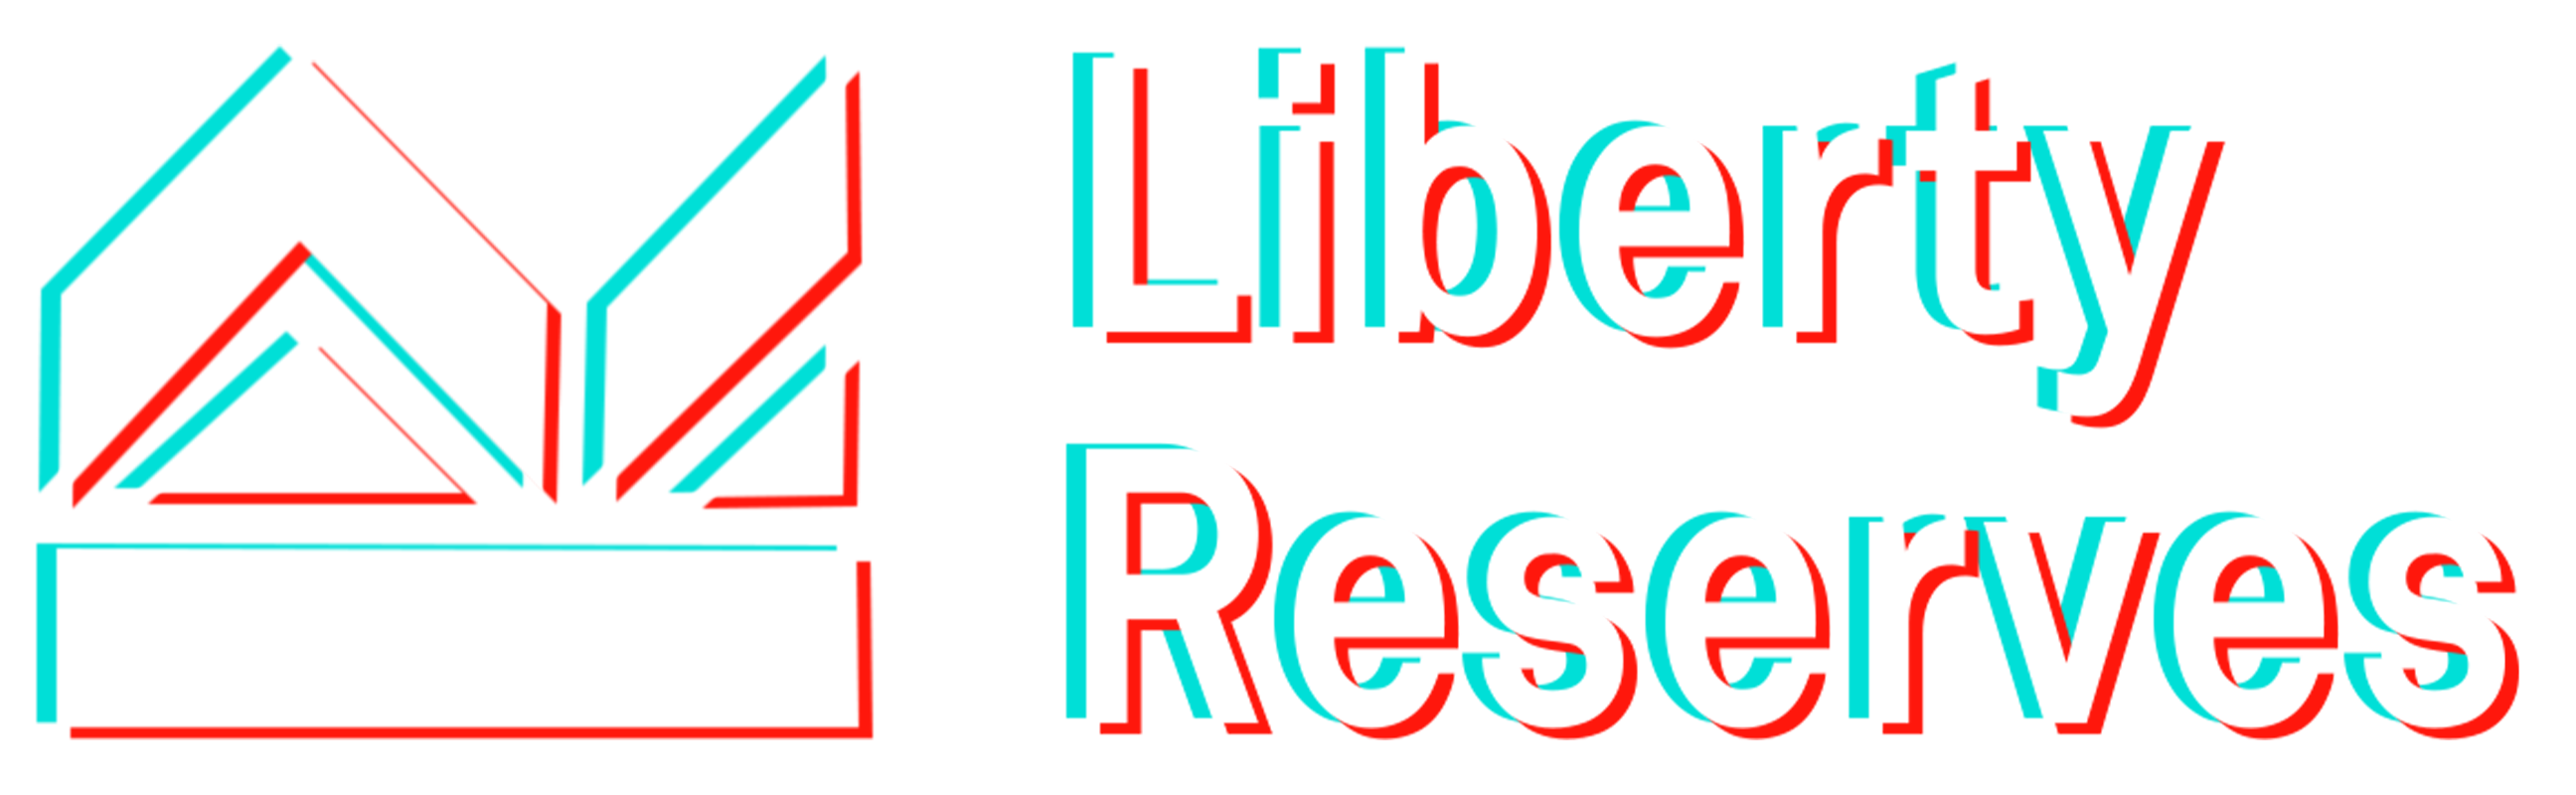 Liberty Reserve Latest News about Crypto and NFT